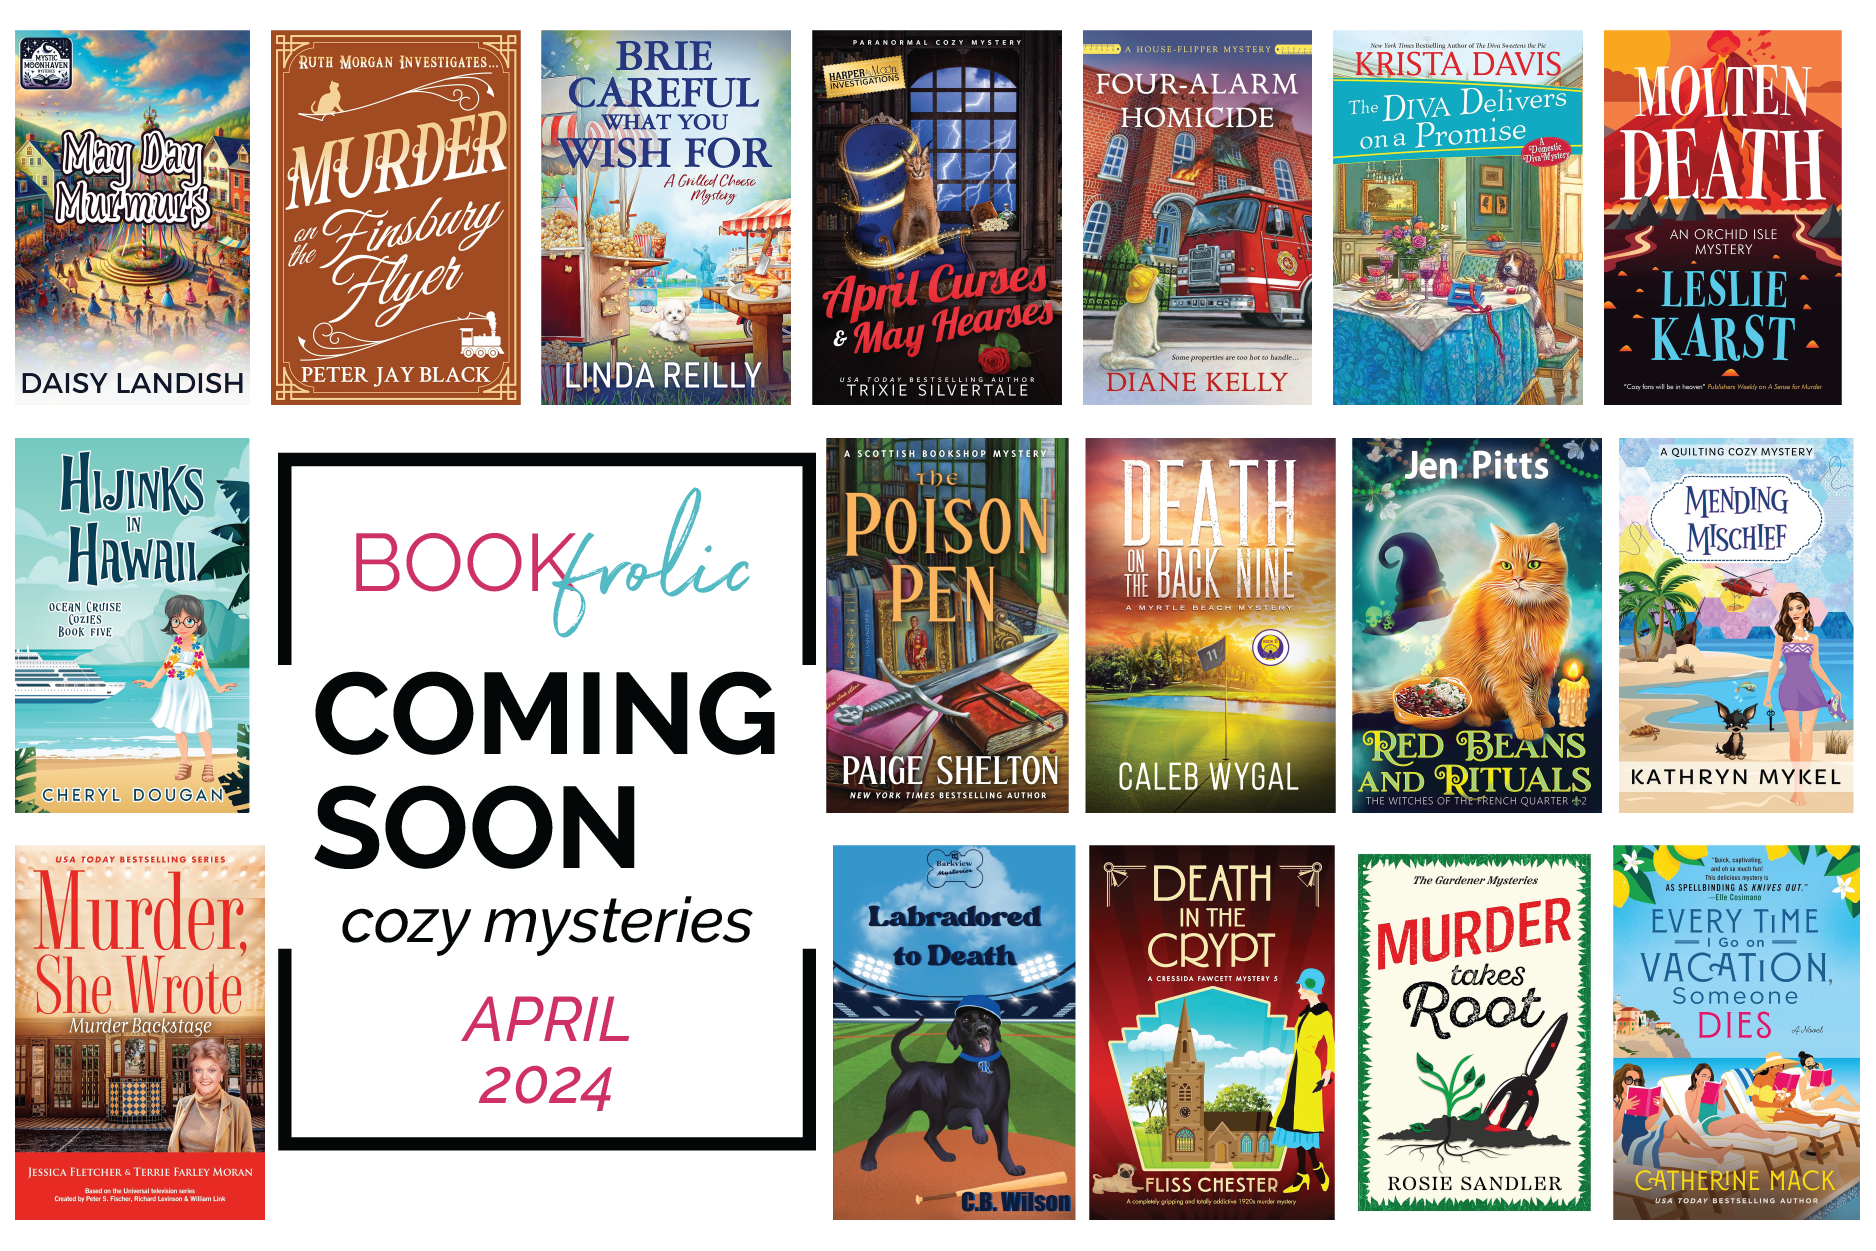 Coming Soon - Cozy Mystery releases in April 2024